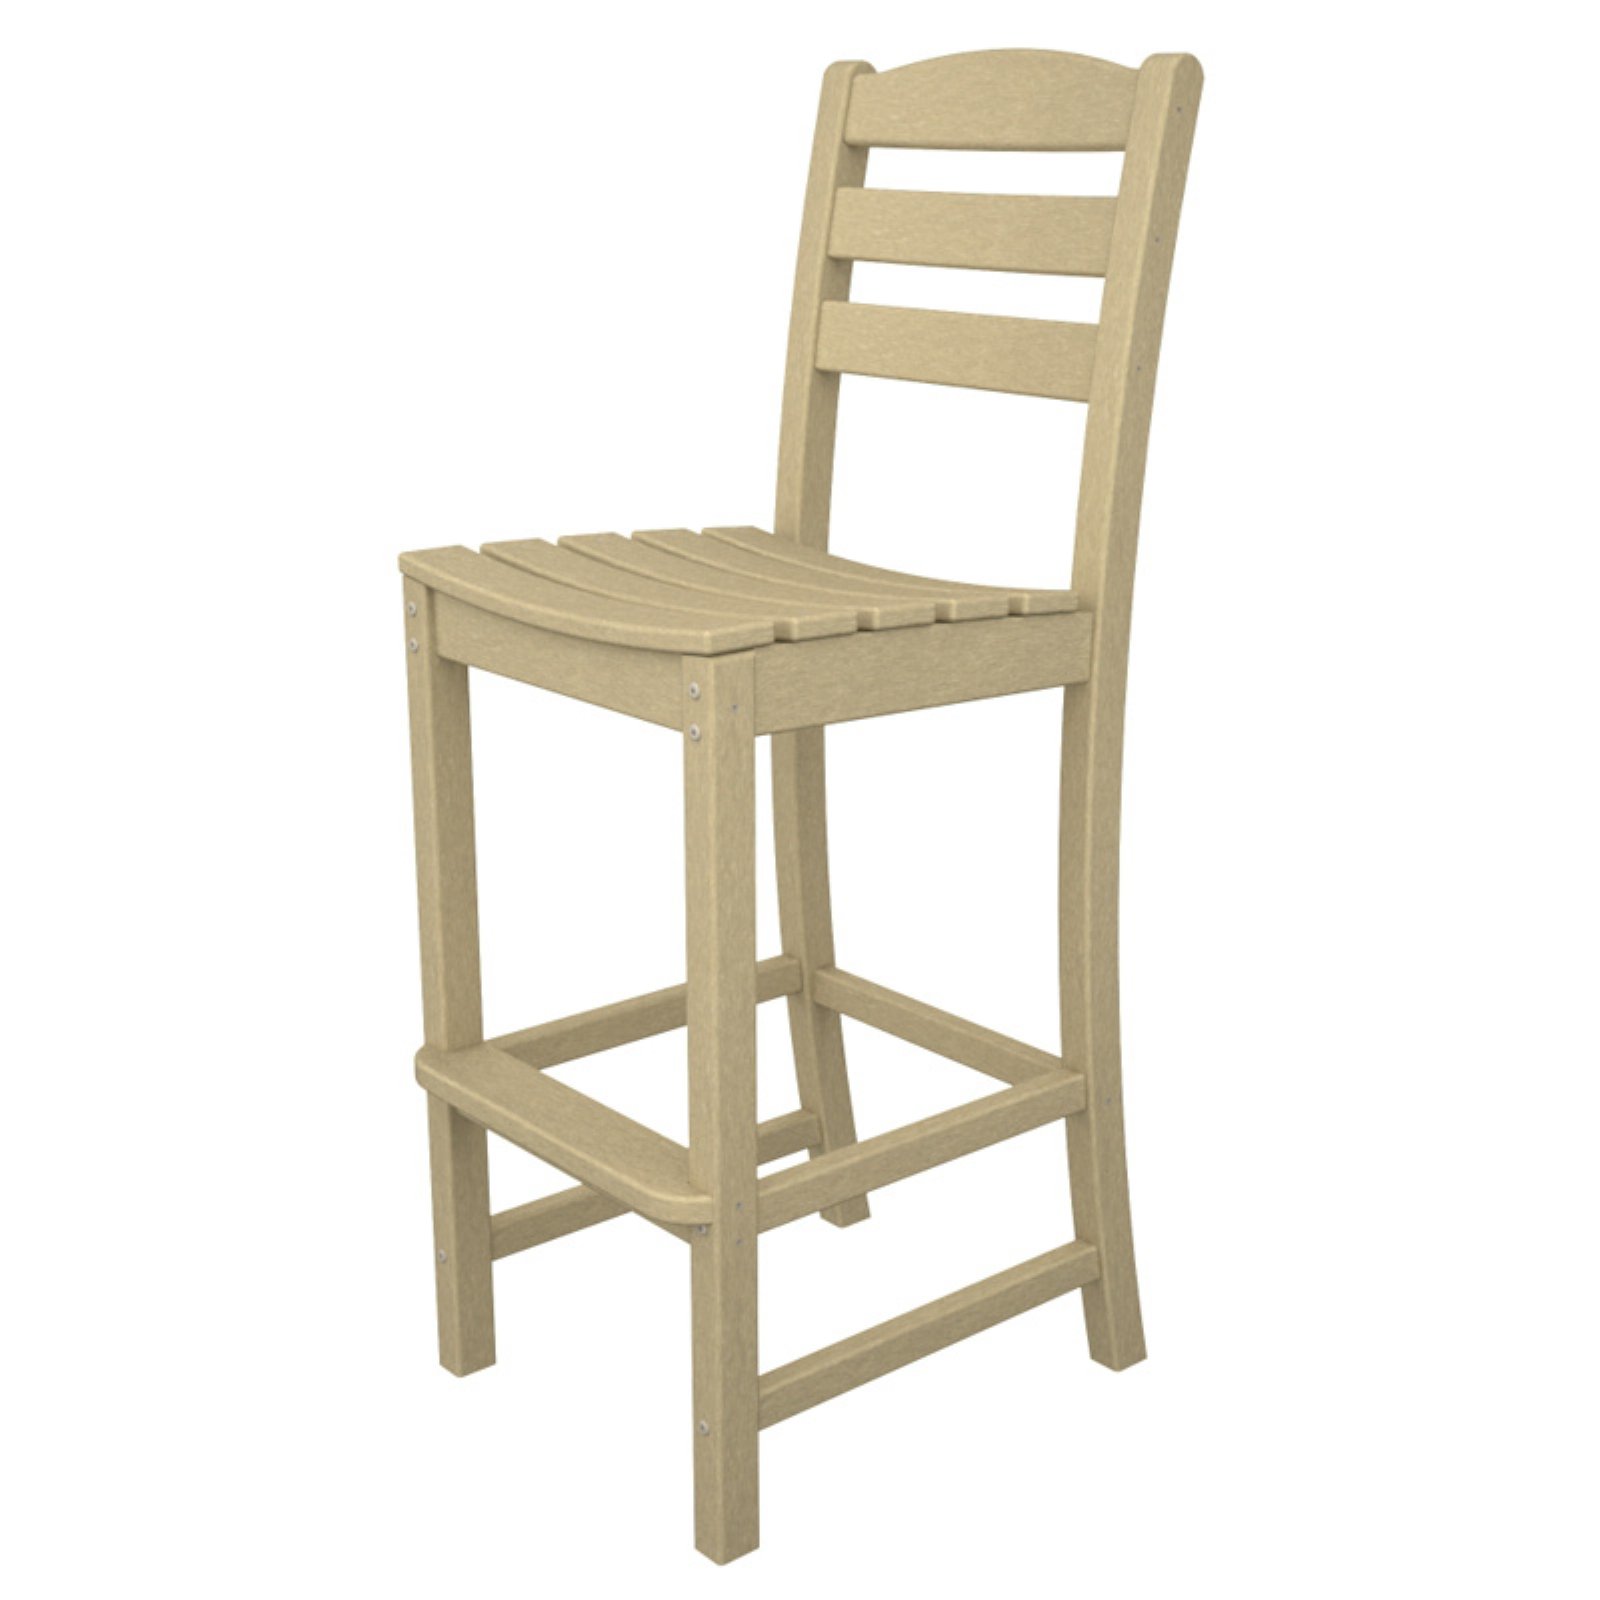 POLYWOOD&reg; La Casa Cafe Recycled Plastic Bar Height Side Chair - image 2 of 2